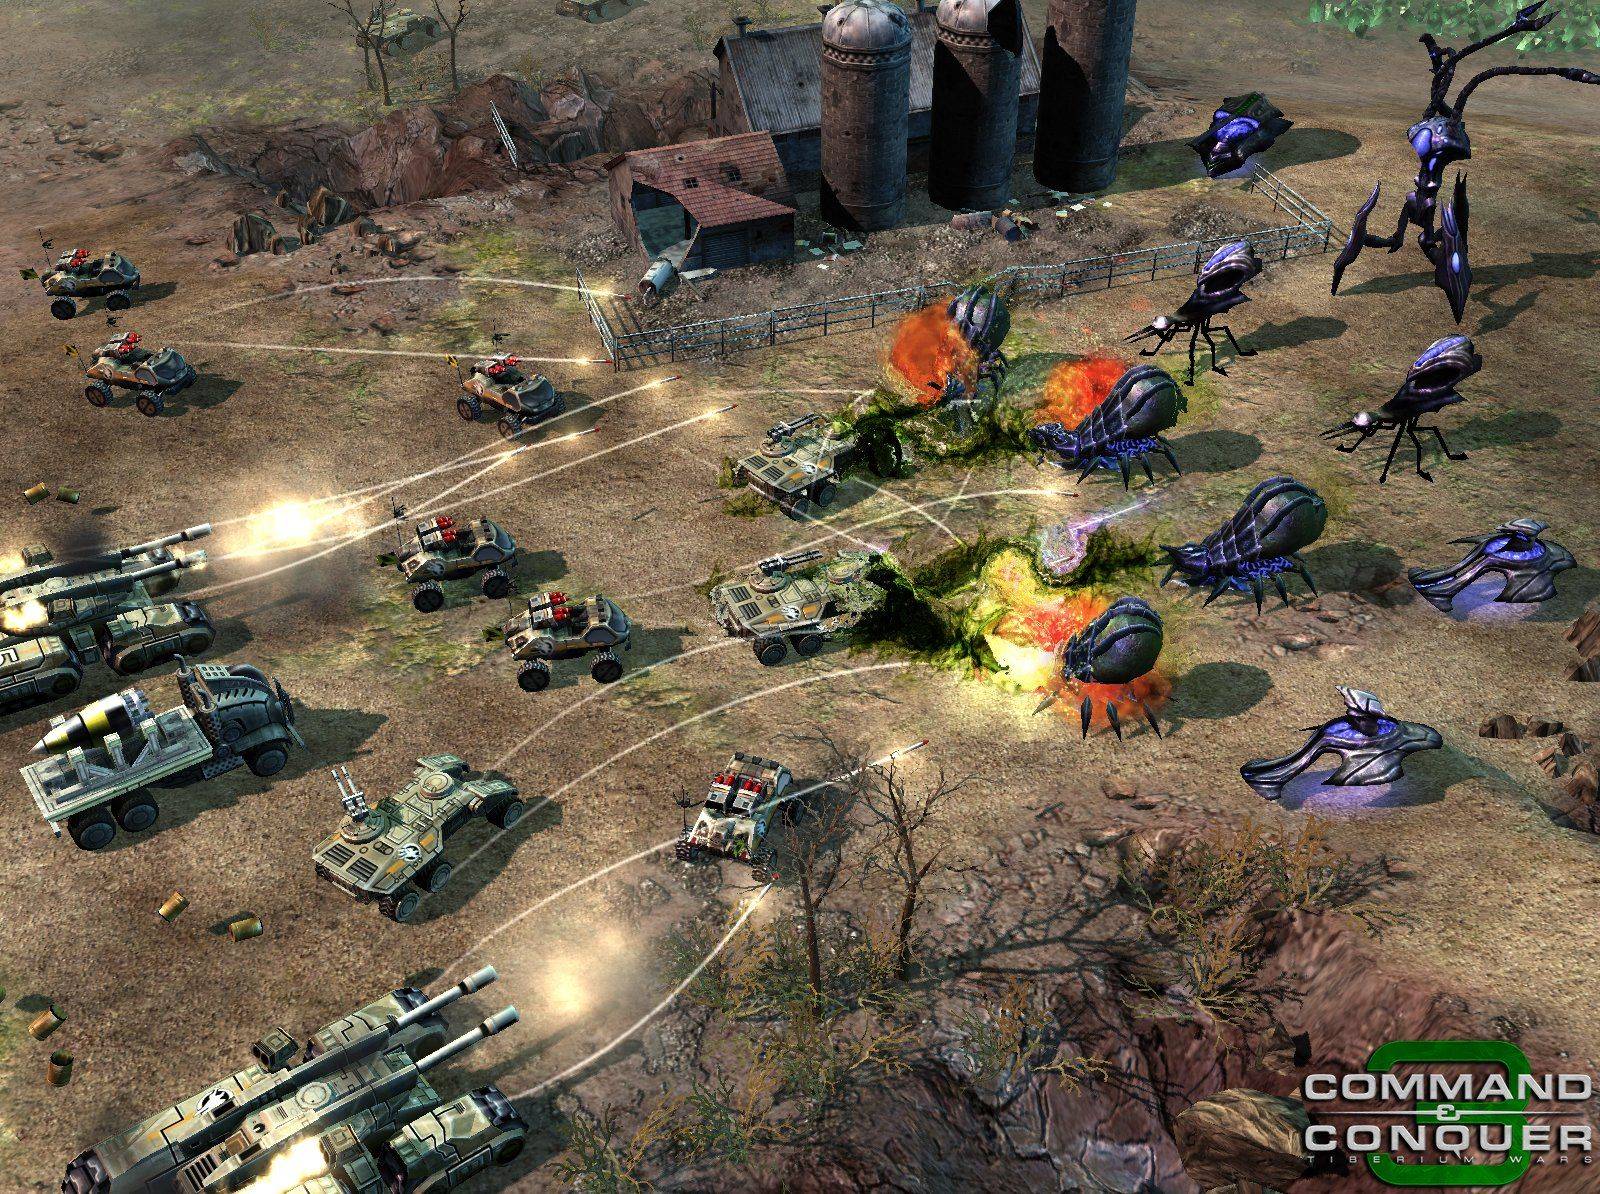 Command And Conquer 3 Tiberium Wars free Download PC Game (Full Version)